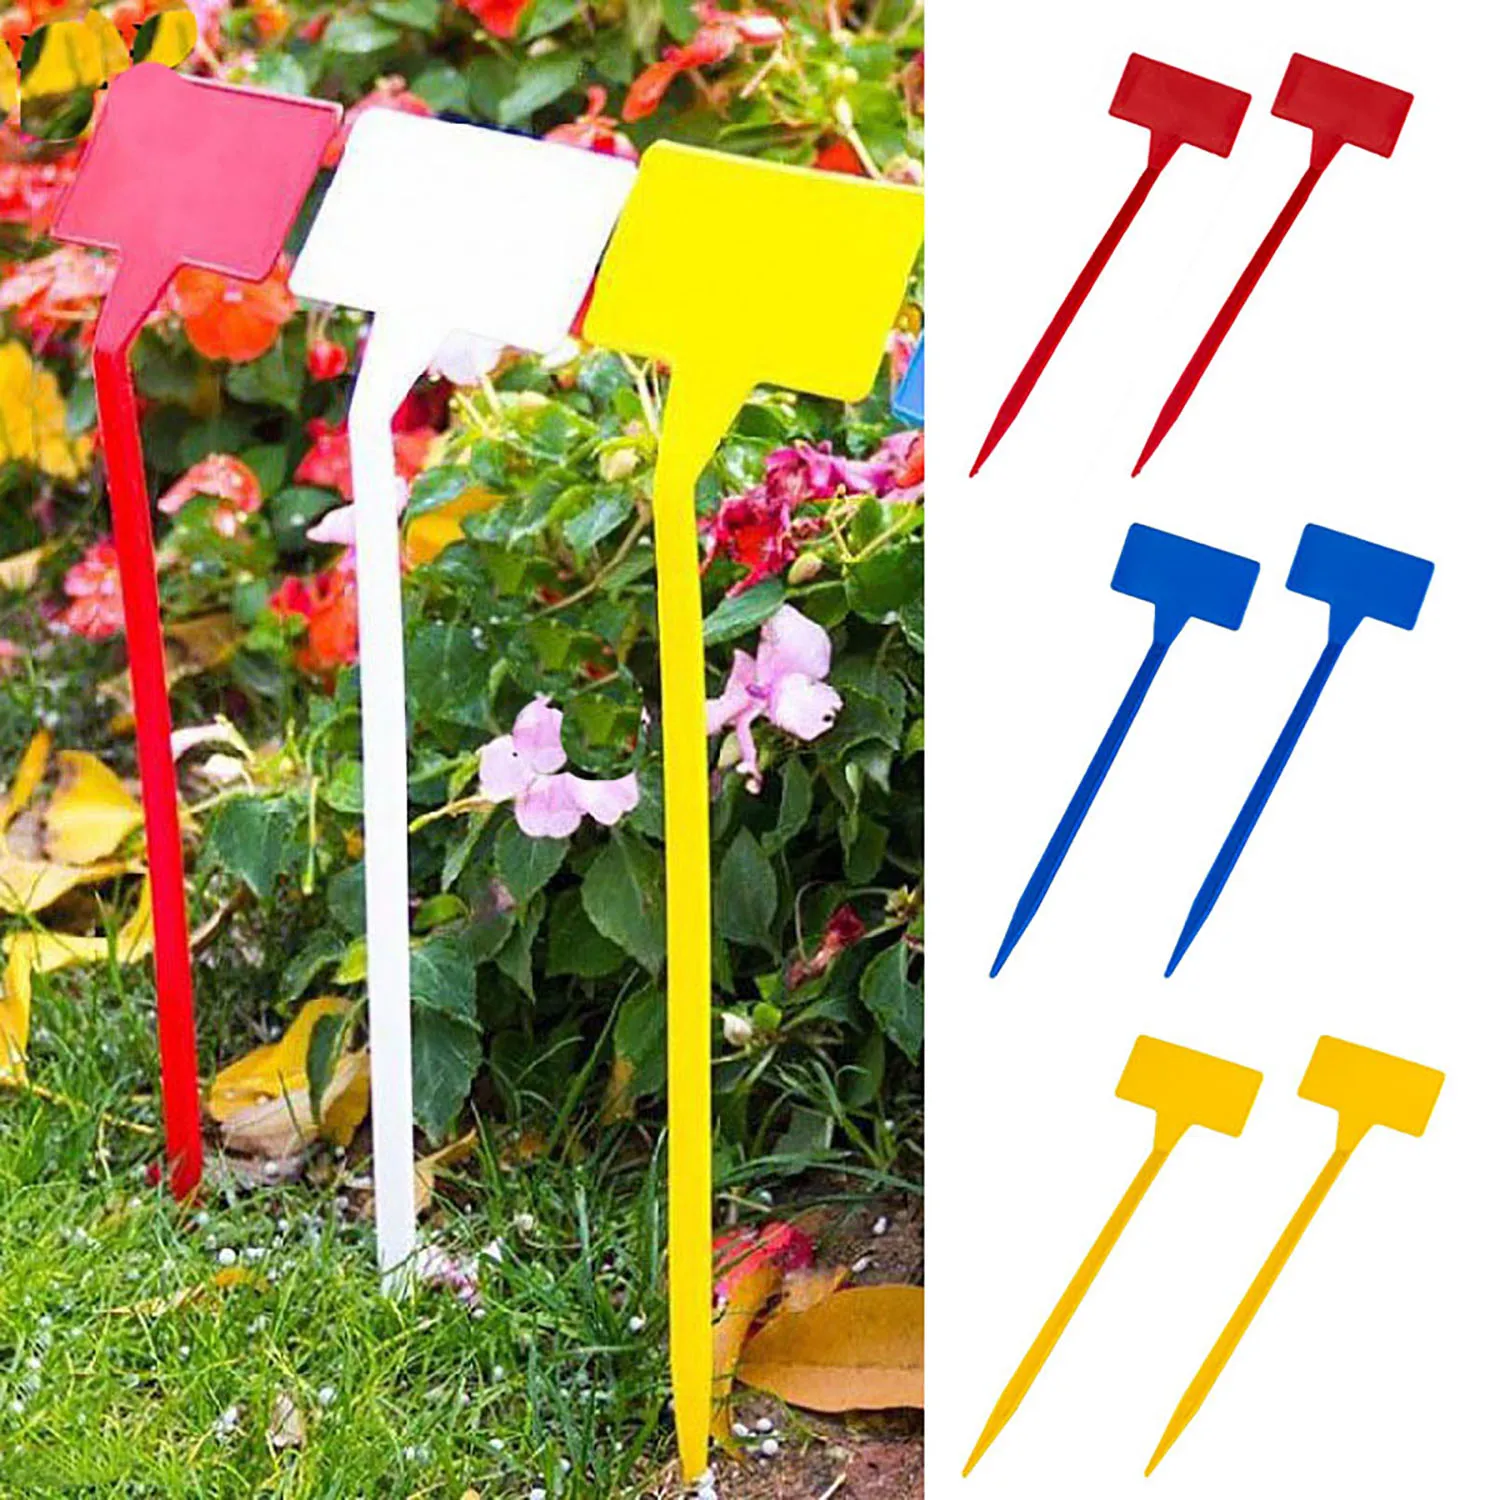 

10PCS Flowers Types Plant Markers on Stake Horticultural Planting Name Tags Can Insert Soil Directly Labels Home Garden Tags